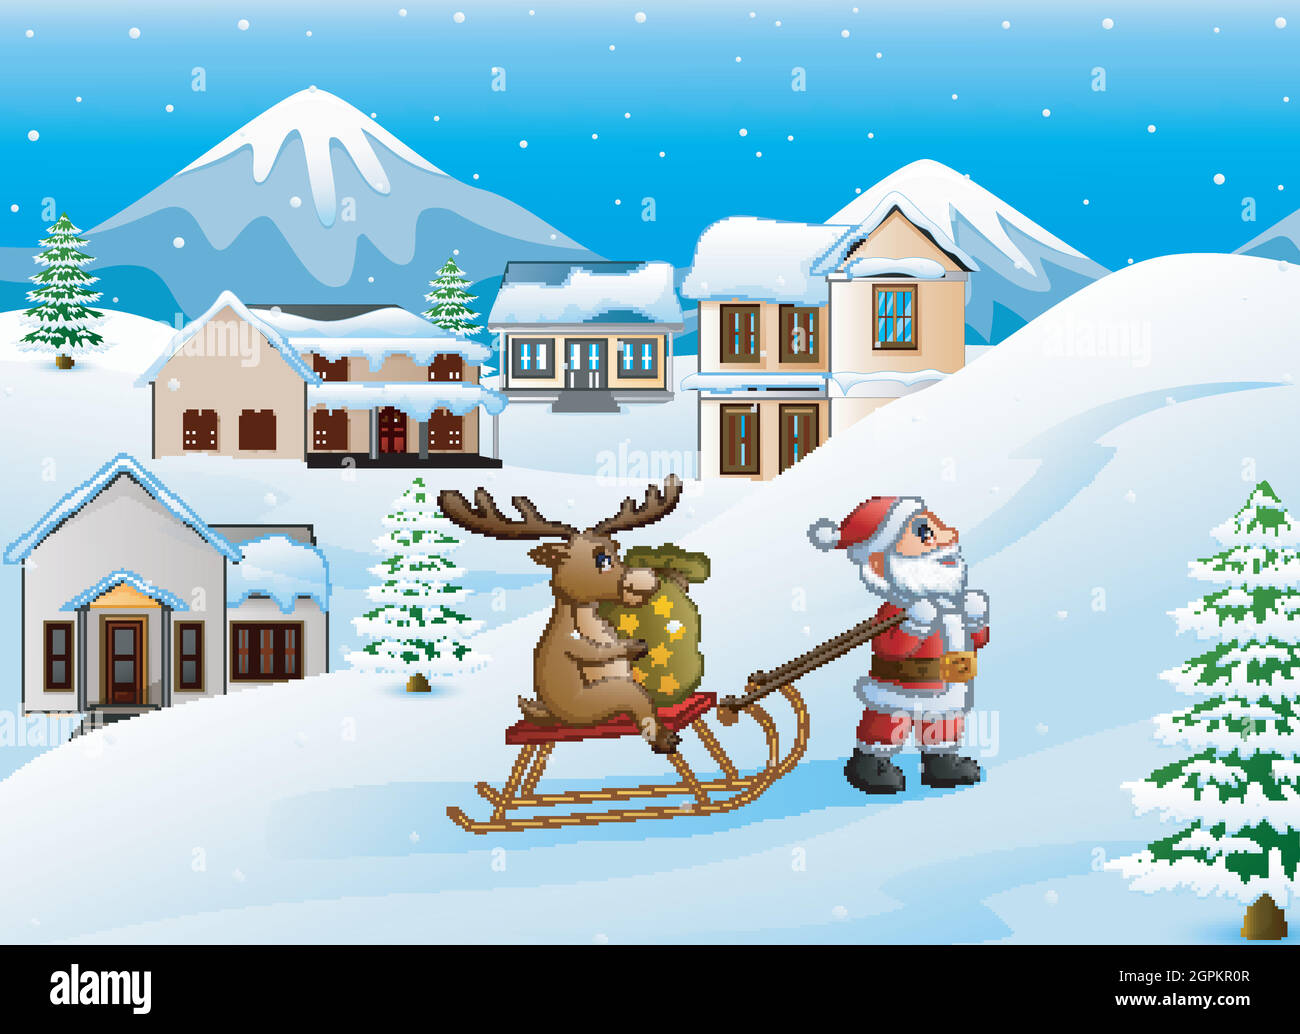 Cartoon funny santa claus pulling reindeer on a sleigh with sack of gifts Stock Vector